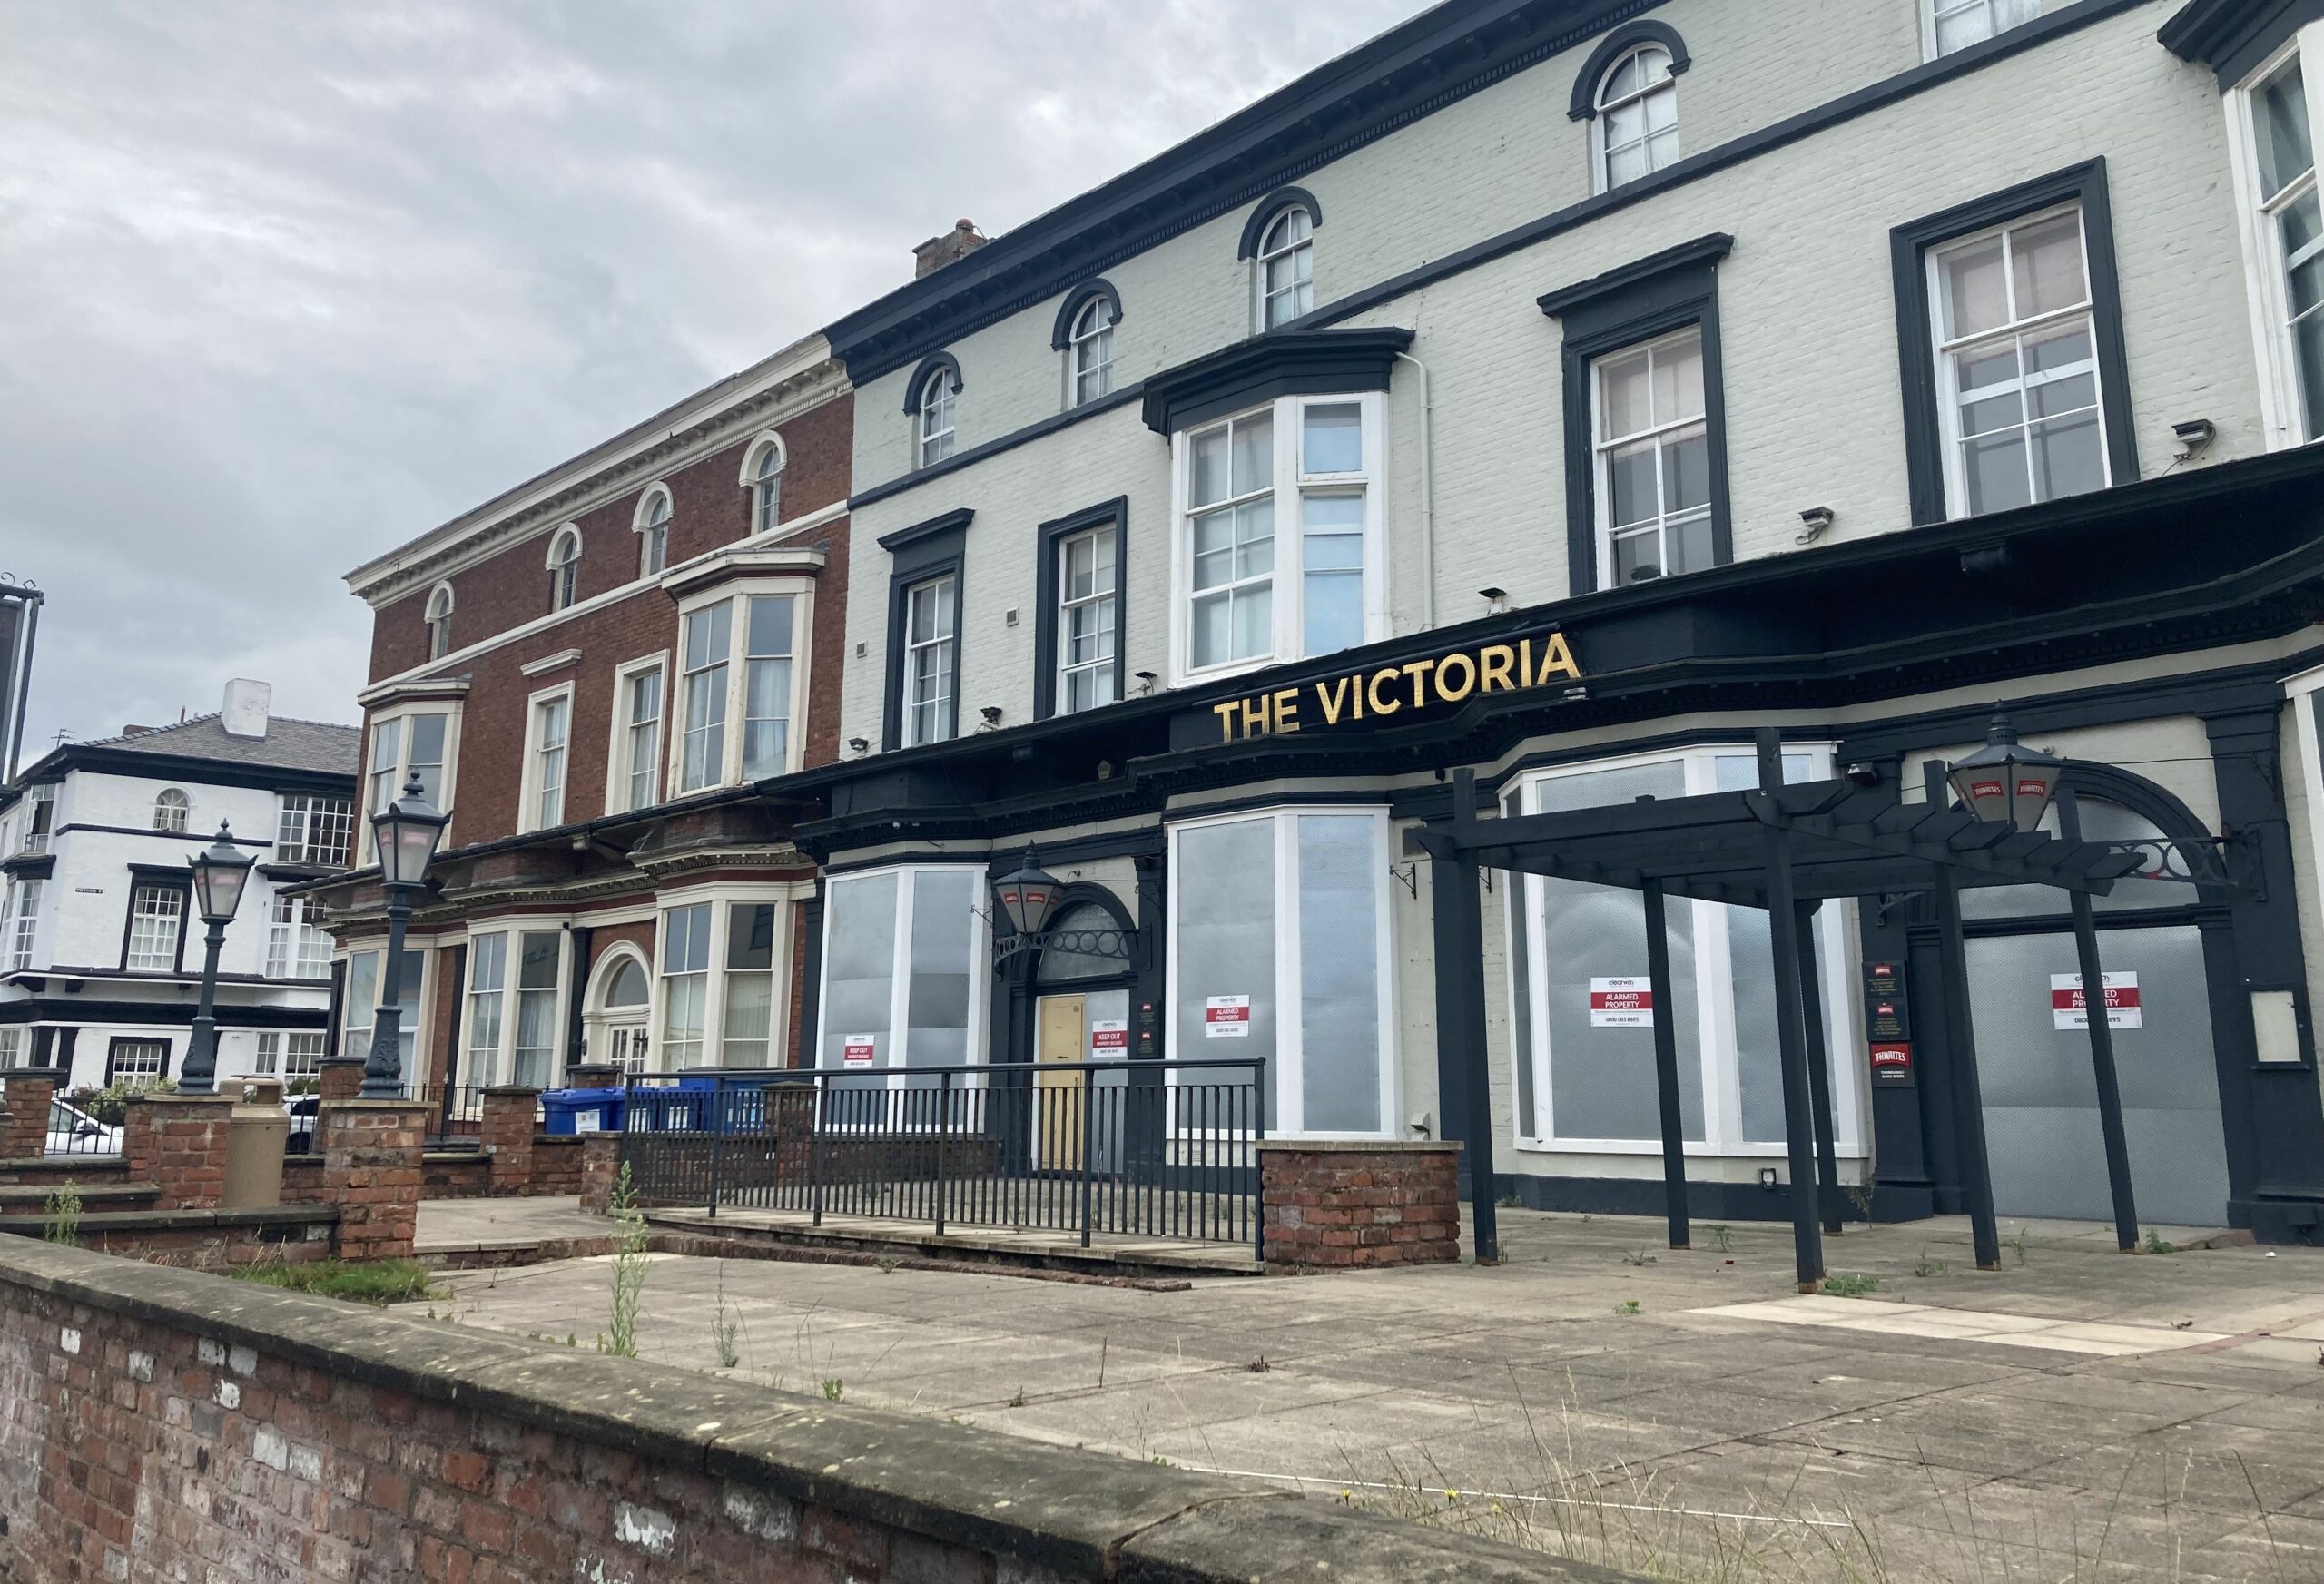 The Victoria pub in Southport. Photo by Andrew Brown Stand Up For Southport